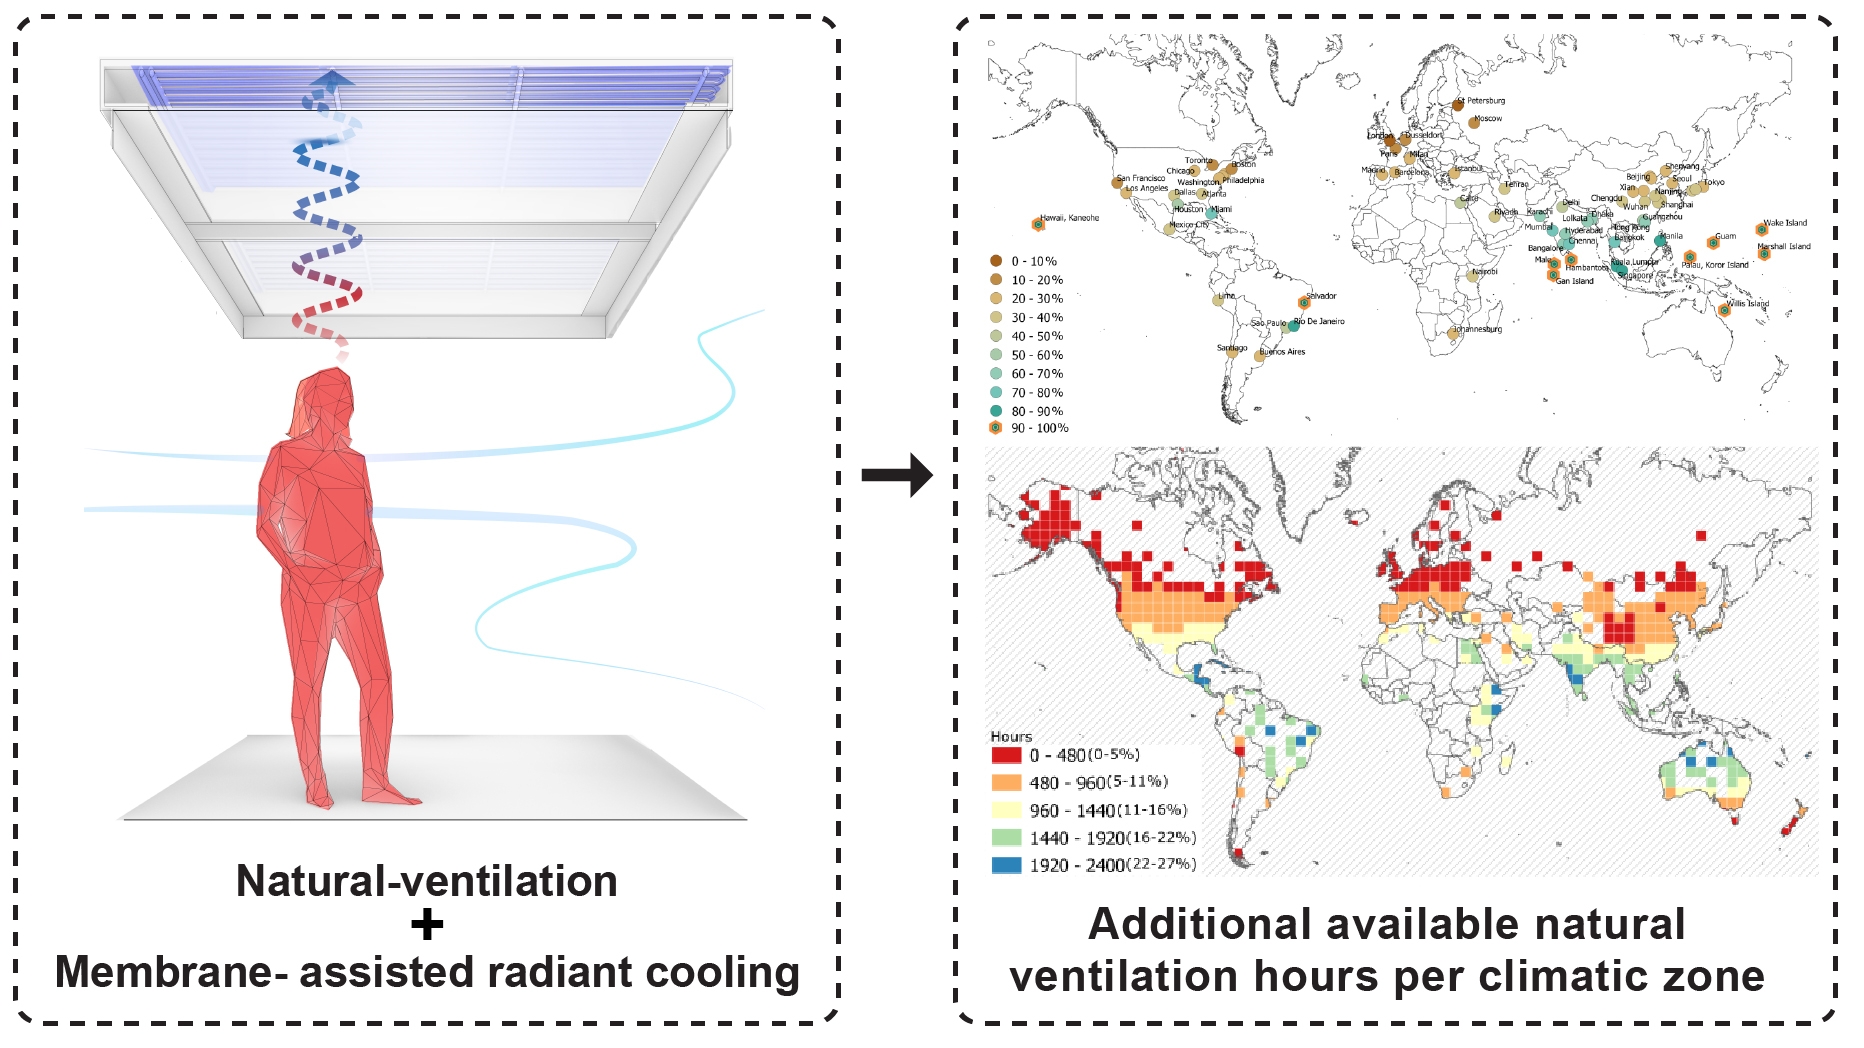 two images showing a radiant ceiling cooling panel and a global map of potential naturally ventilated zone